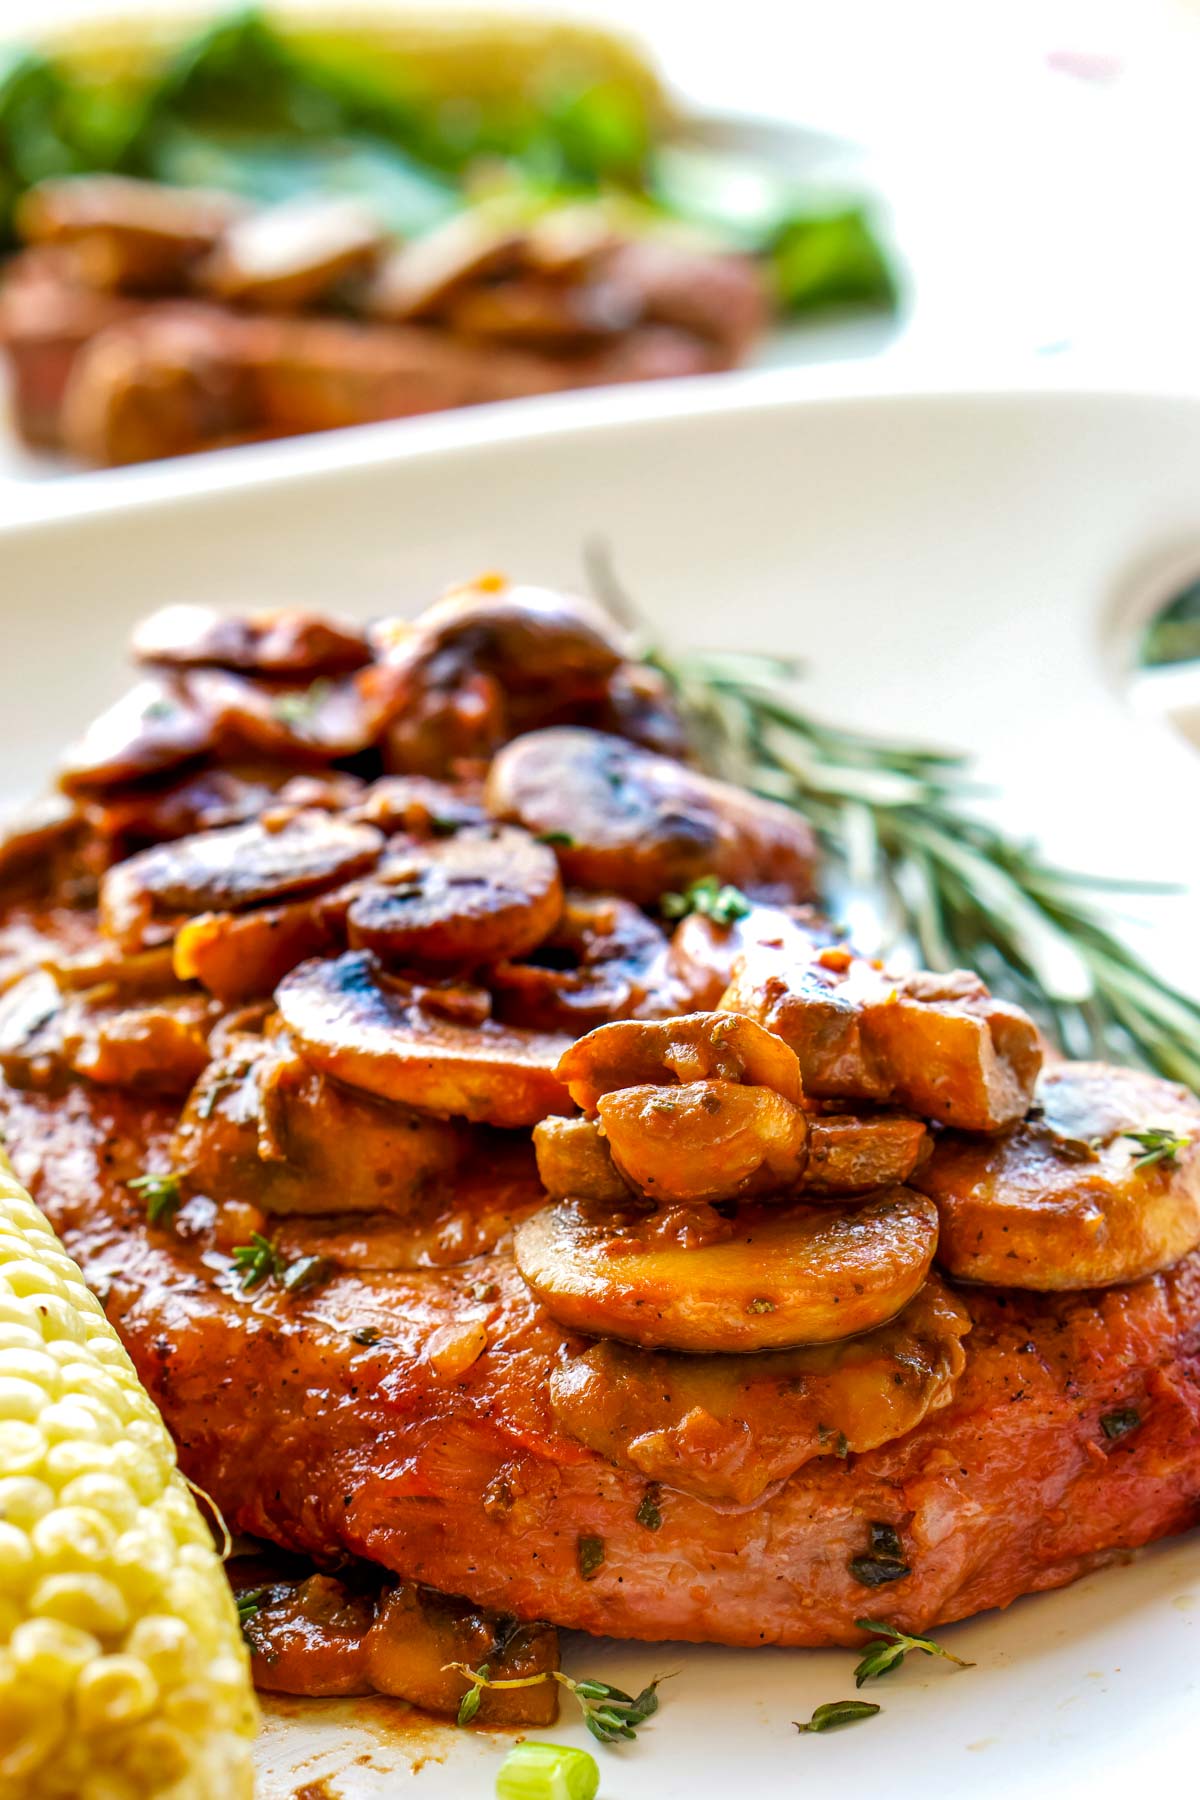 The finished Grilled Steak Marsala on a white plate topped with mushroom.